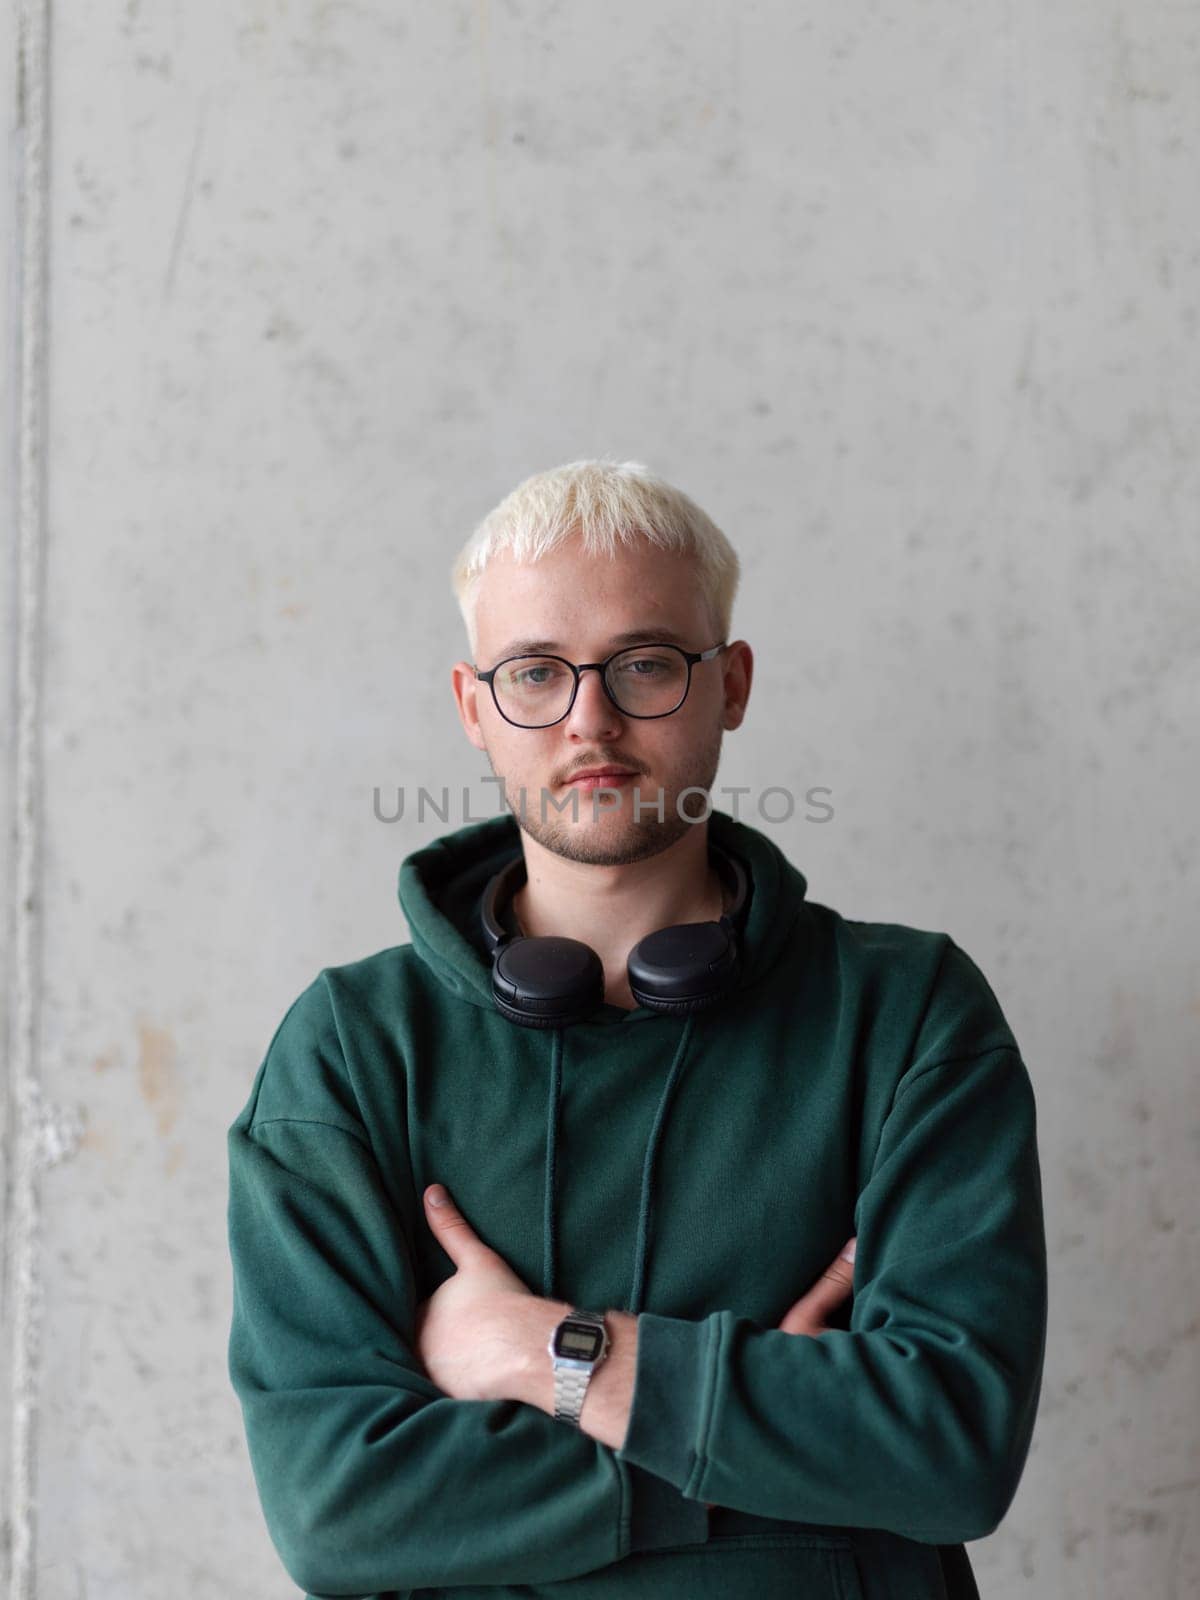 A man with blue hair, eyeglasses, and a green sweatshirt confidently poses with his arms crossed against a gray background, showcasing his fashionable and unique style